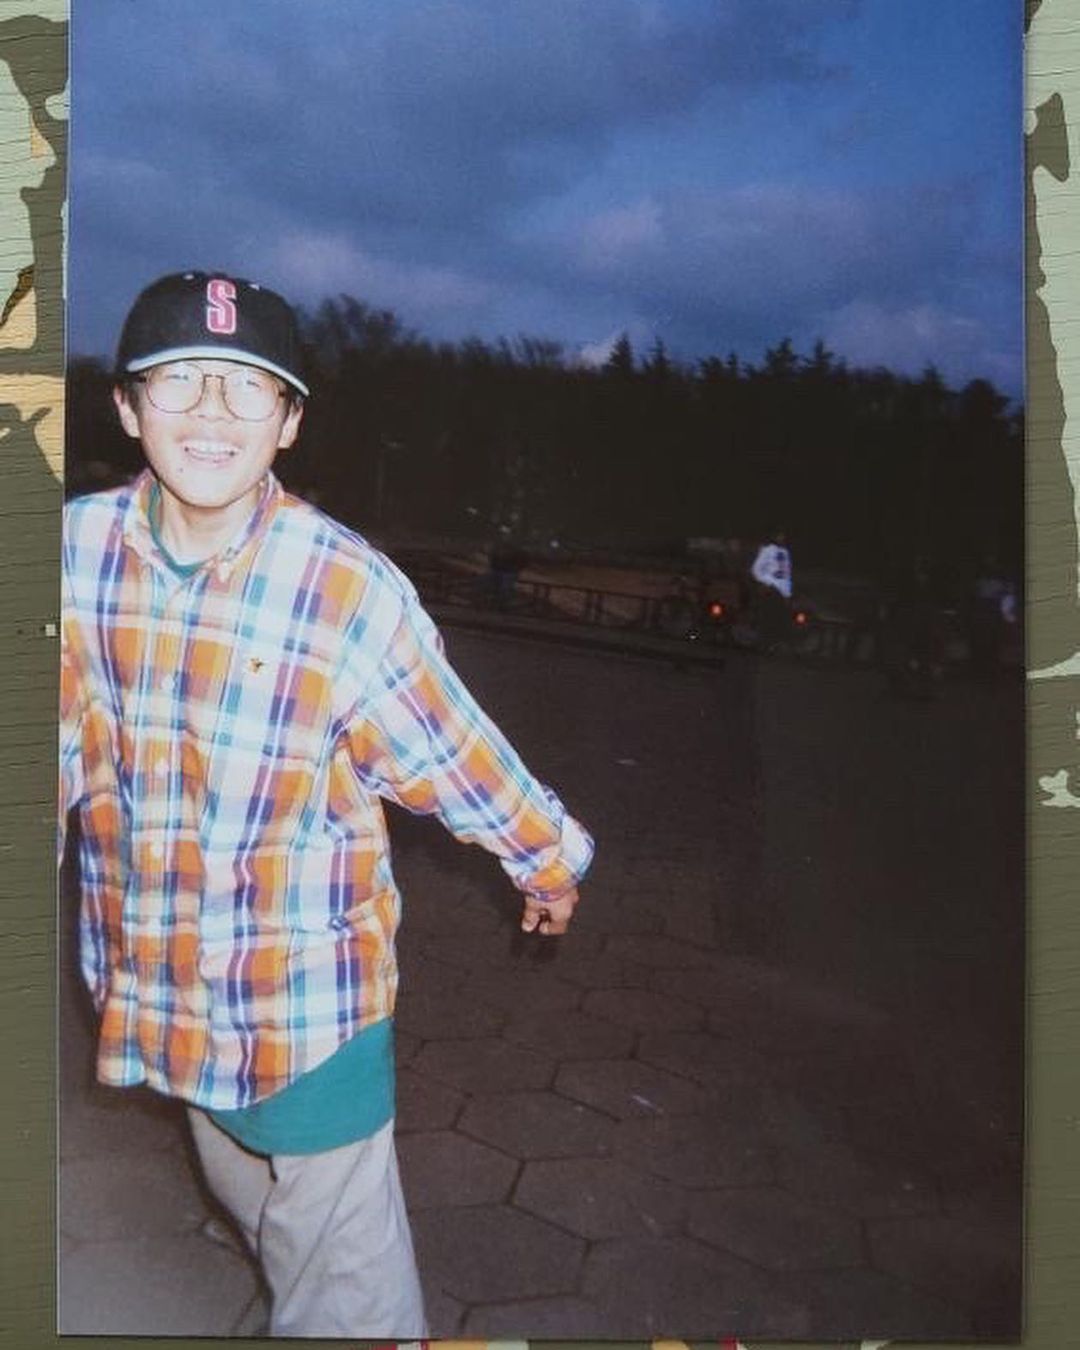 The cover of Megane to Otaku to Skateboard was based on this photo of Okada as a boy